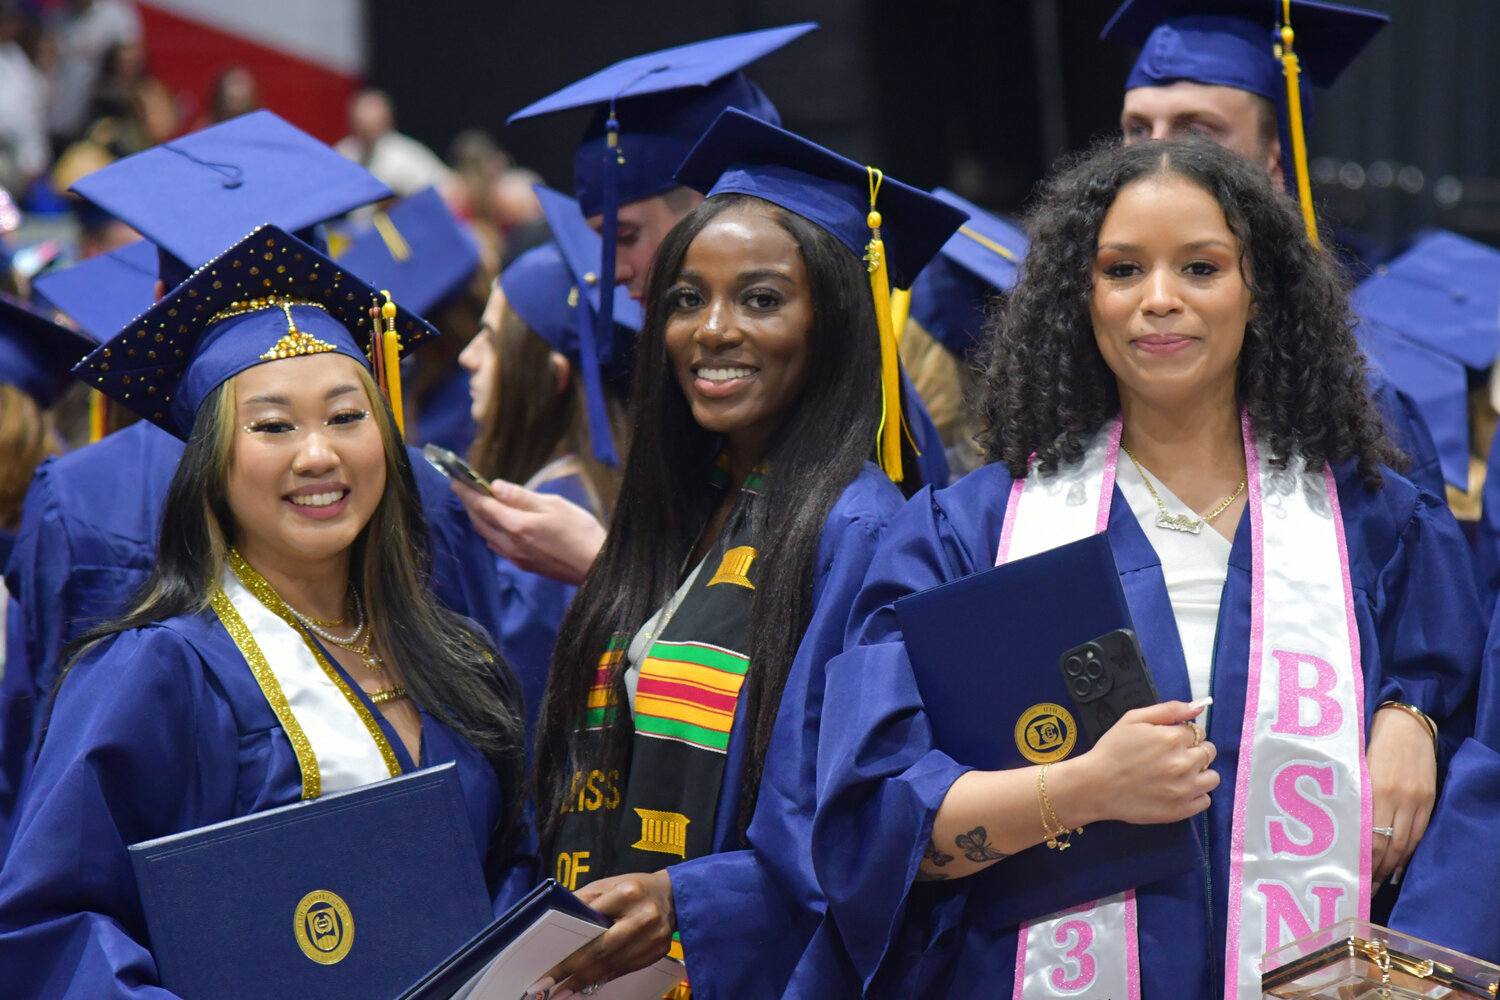 Students were all smiles as they were finally able to walk across the stage and received their degree holders.